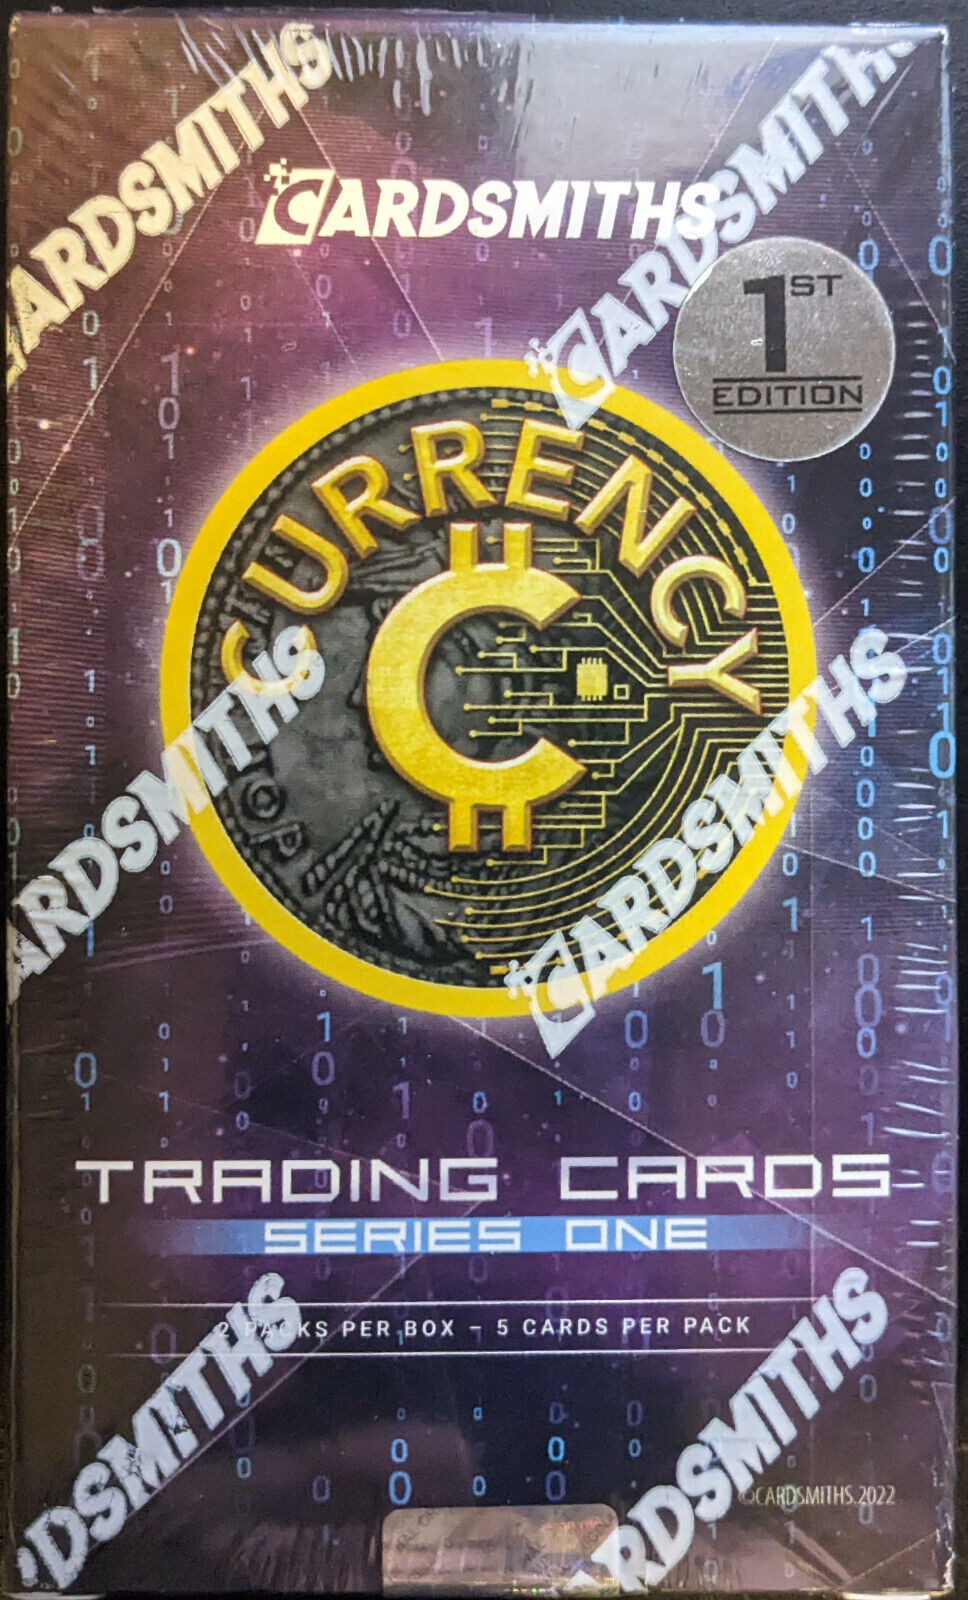 2022 CARDSMITHS 1st Edition Currency Series 1 Trading Cards Box - 2 Packs Sealed